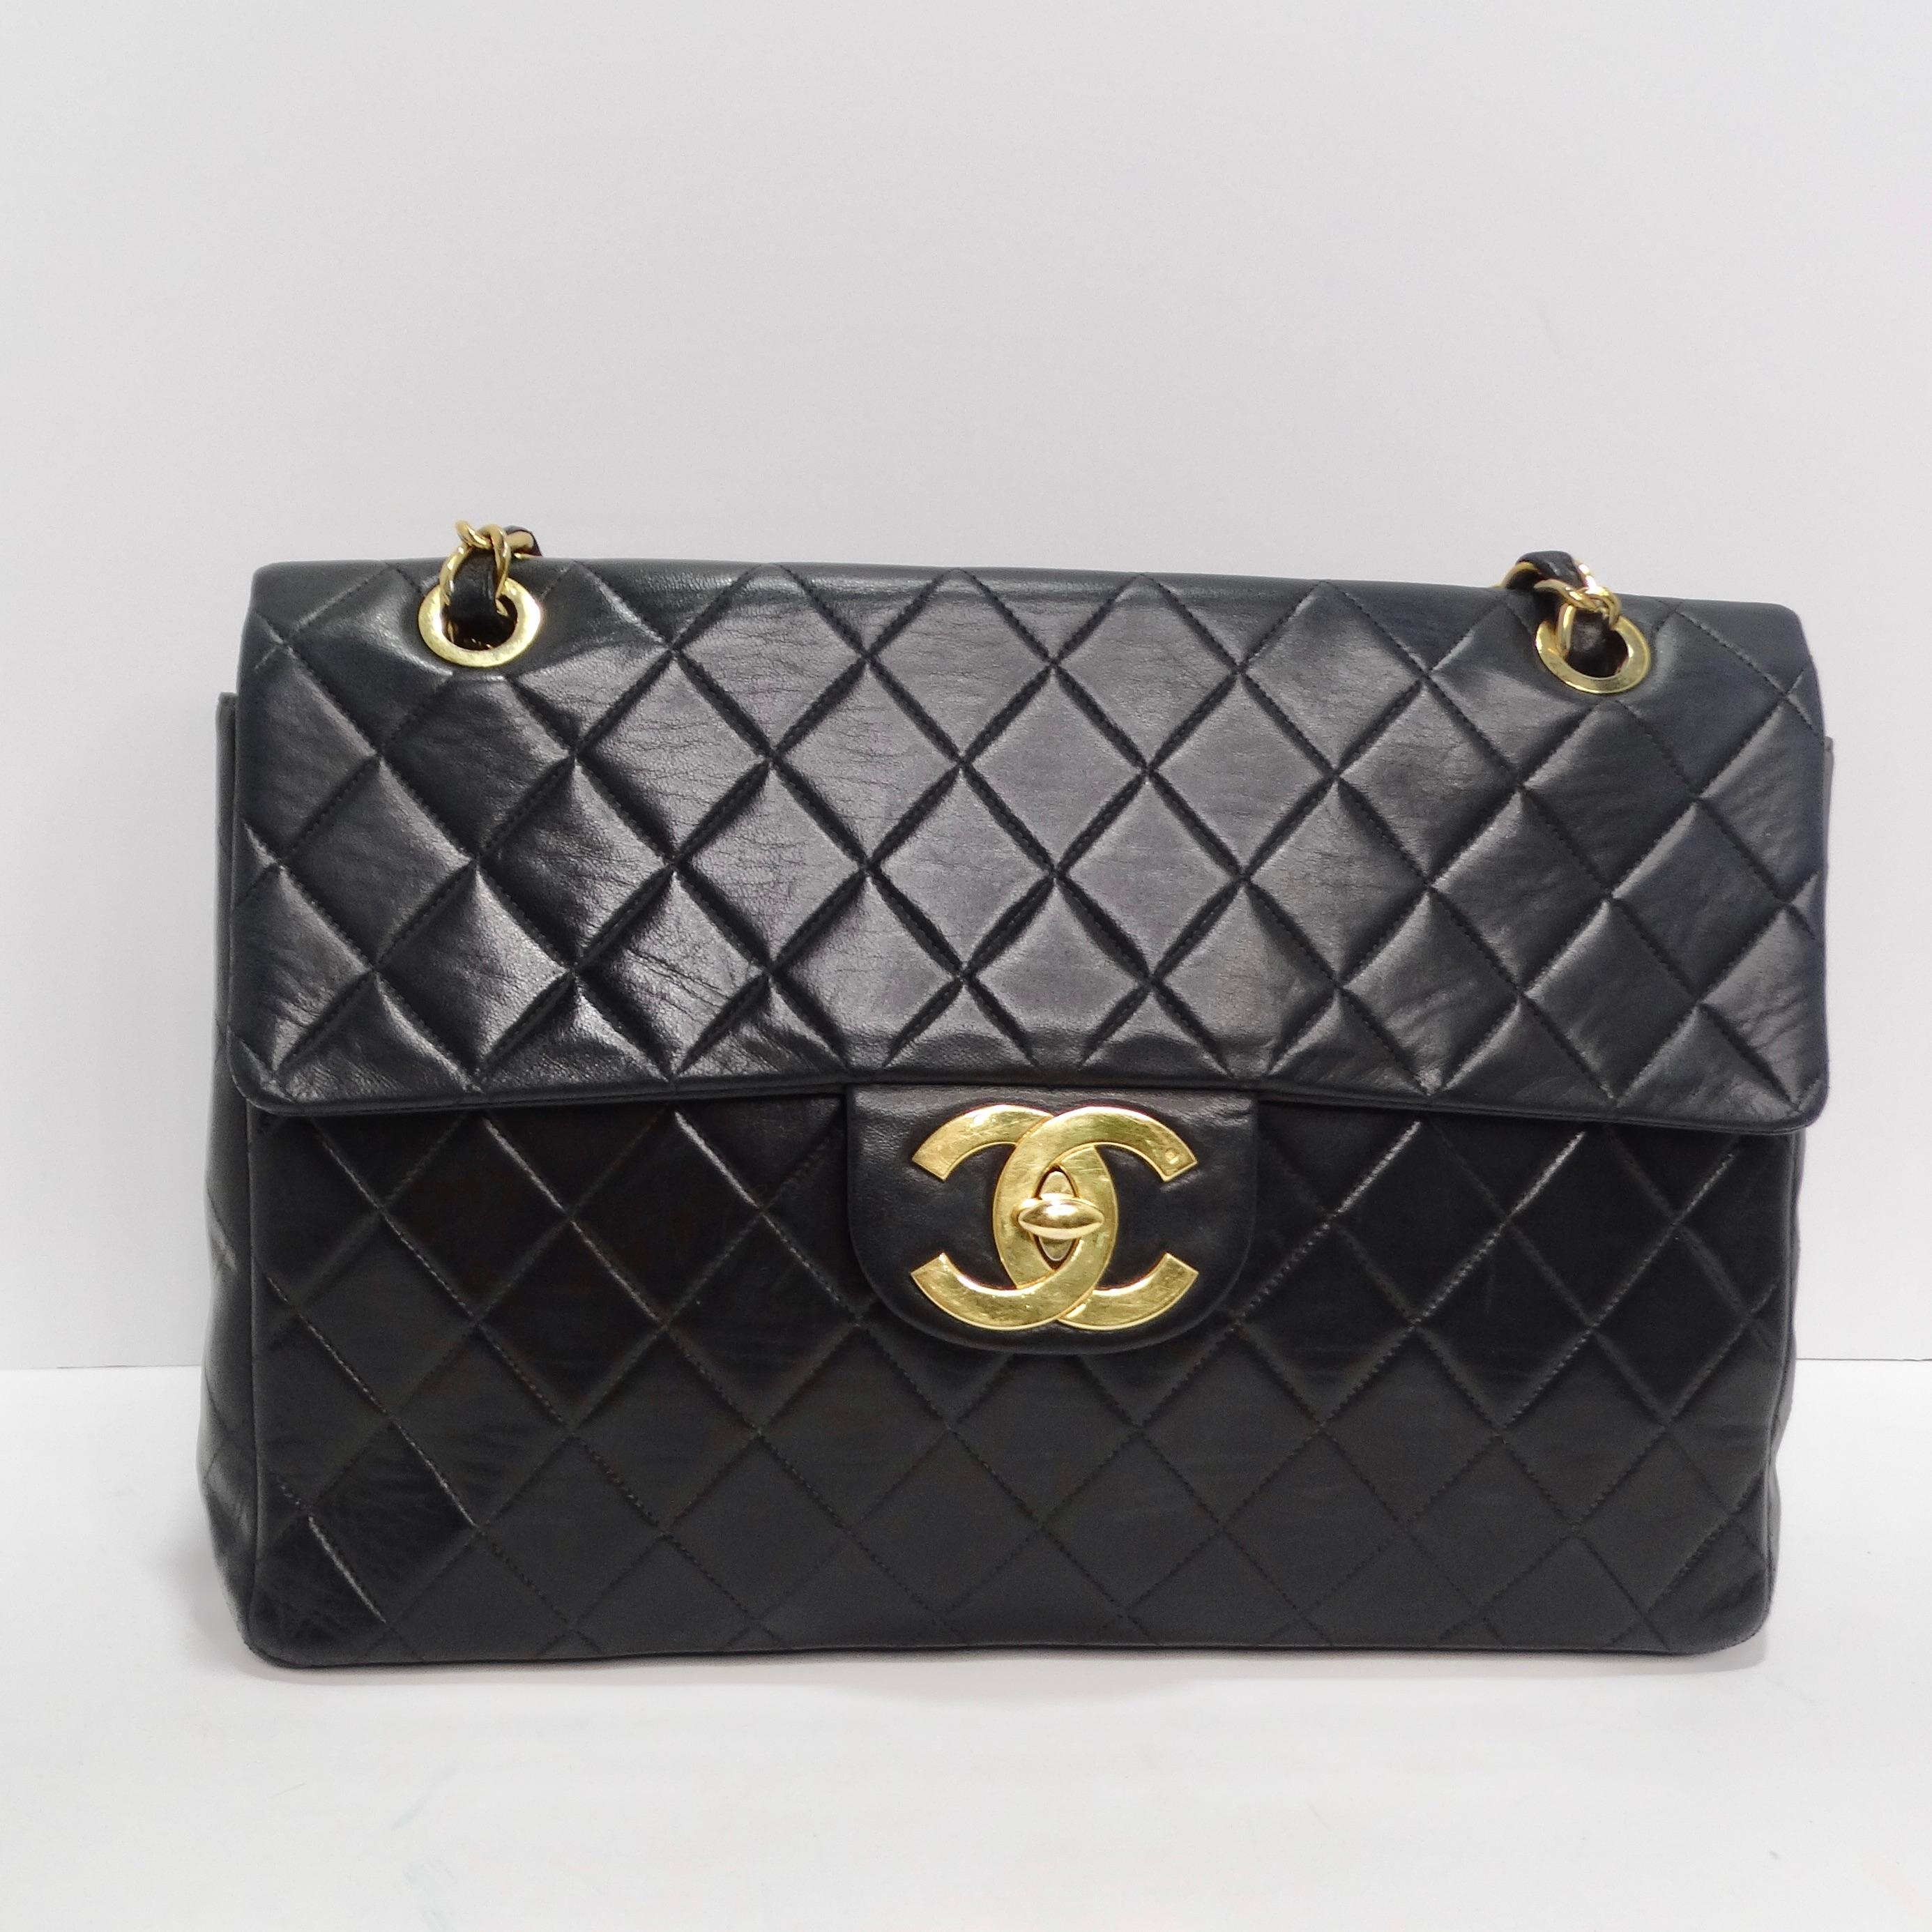 Introducing the Timeless Elegance of Chanel: 1980s Classic Black Leather Maxi Single Flap Handbag! Unveil the epitome of sophistication with our authentic CHANEL Lambskin Quilted Vintage Maxi Single Flap Handbag in Black. This stunning piece hails